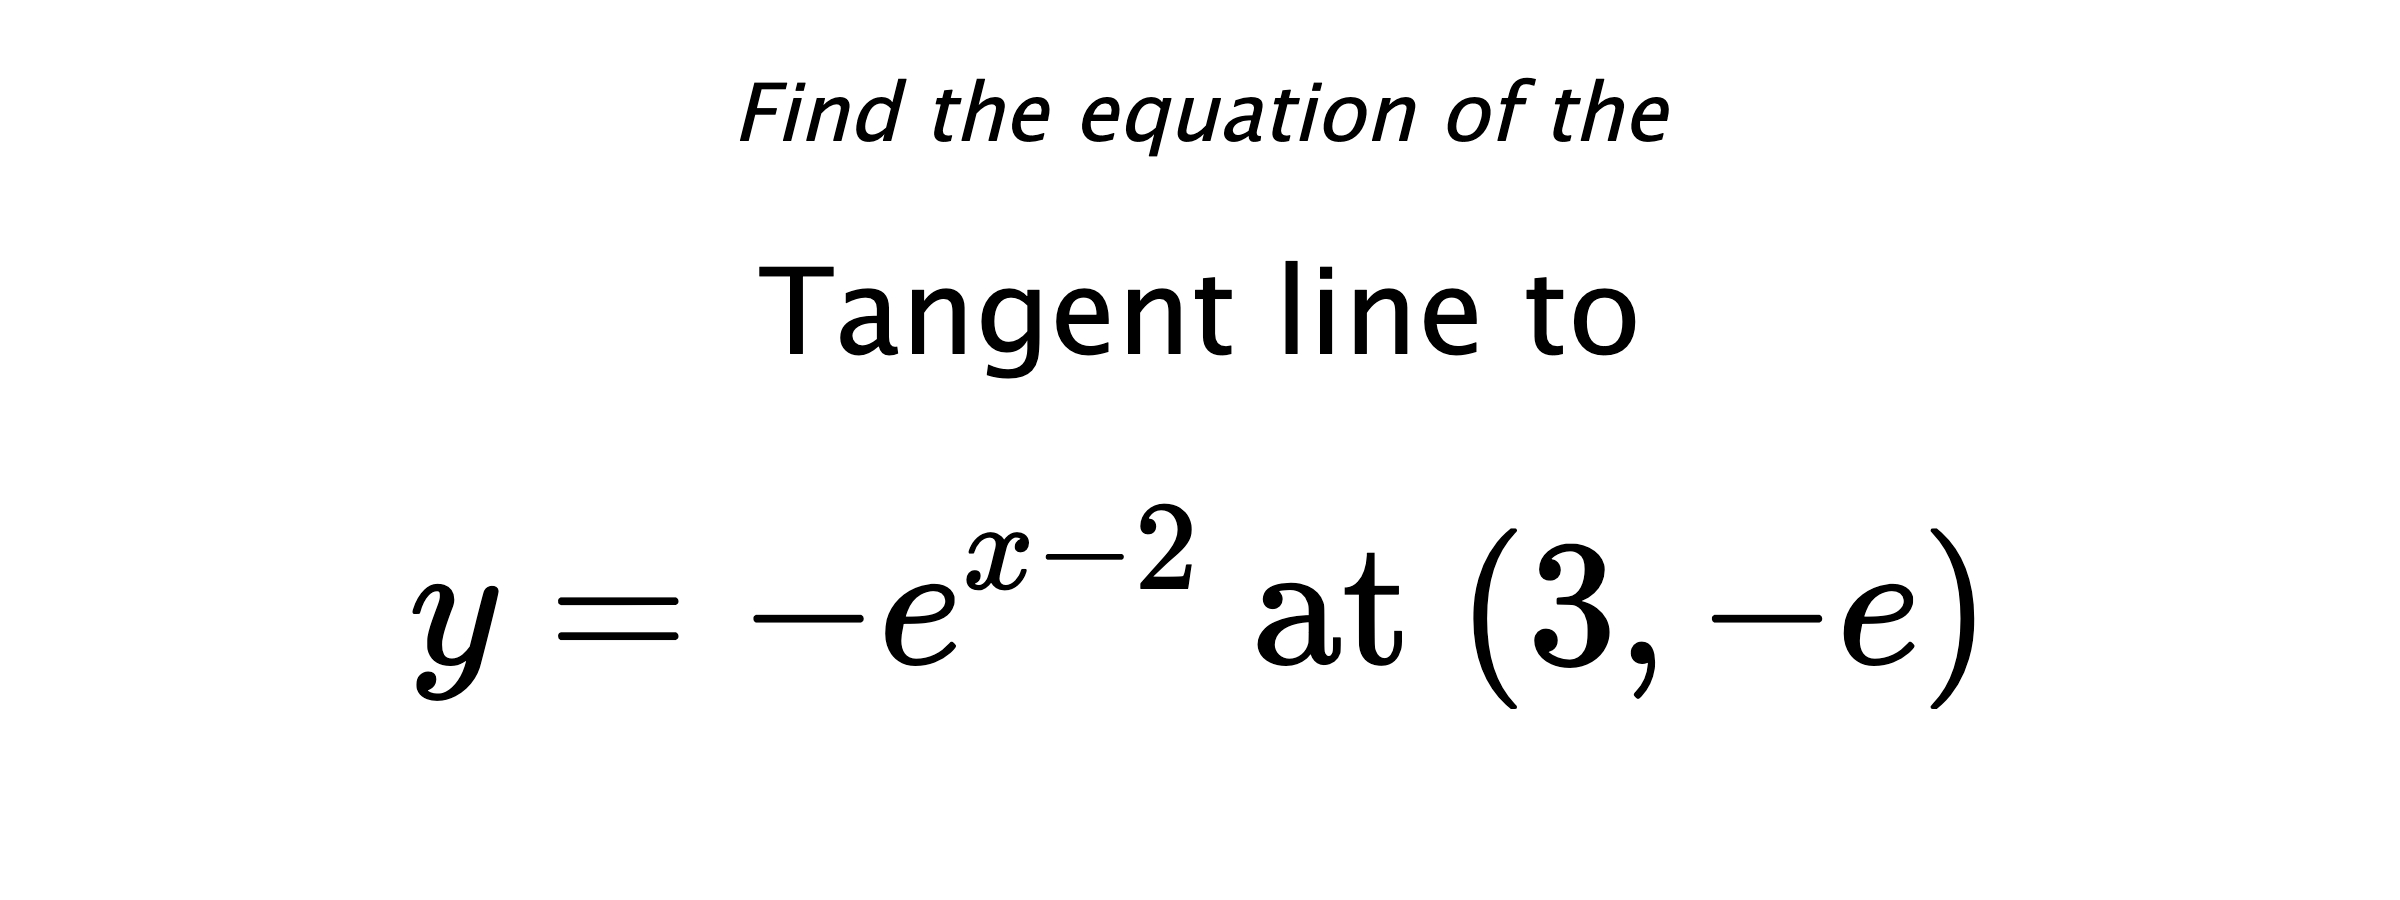 Find the equation of the Tangent line to $$ y=-e^{x-2} \text{ at } (3,-e) $$